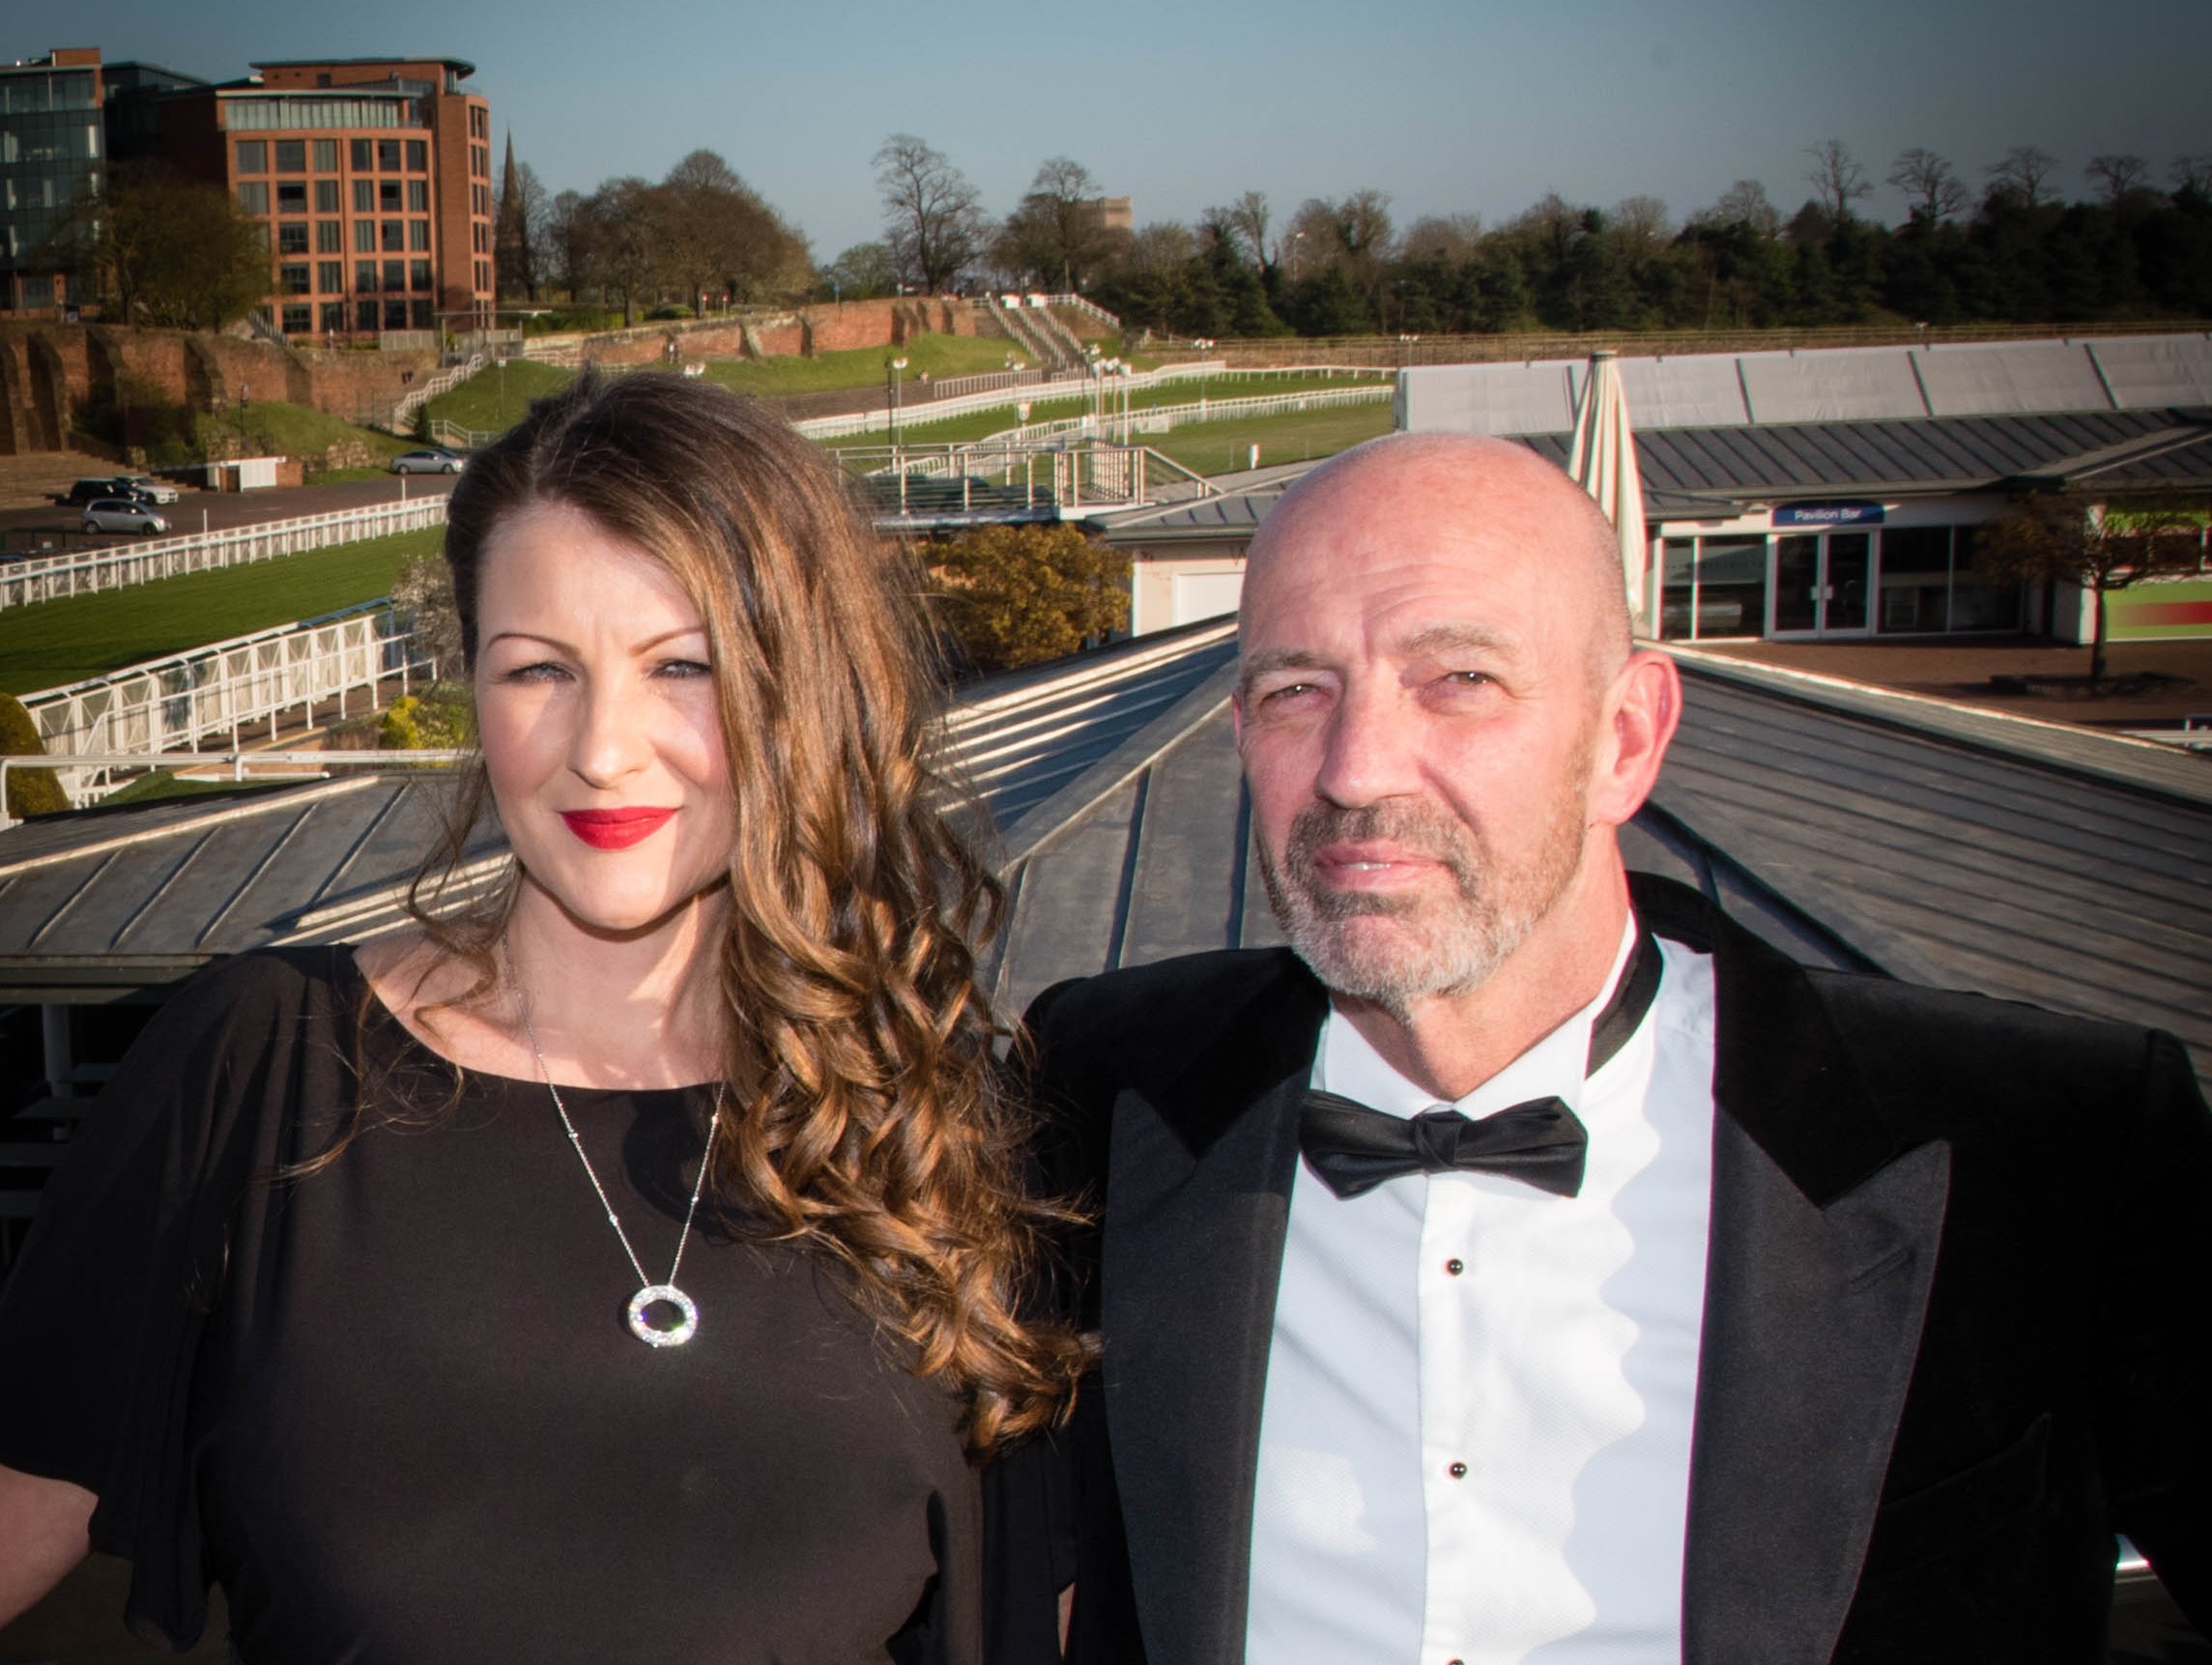 Charity ball staged by Wrexham businessman raises £40,000 to help children with rare condition